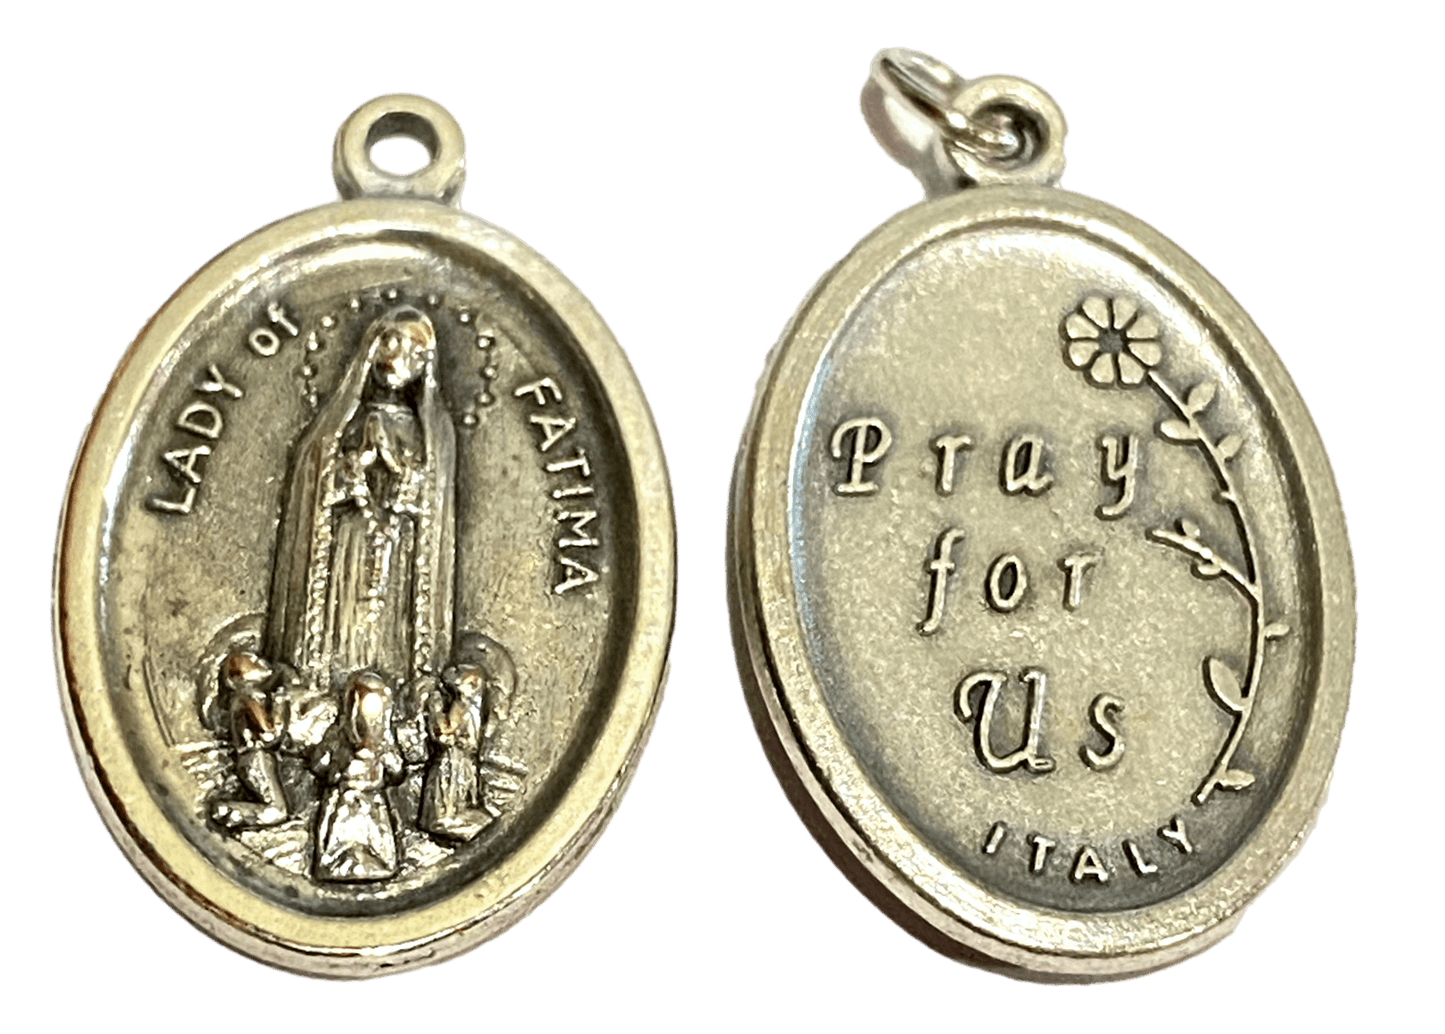 Medal Saint Fatima Pray For Us Italian Double-Sided Silver Oxidized Metal Alloy 1 inch - Ysleta Mission Gift Shop- VOTED El Paso's Best Gift Shop